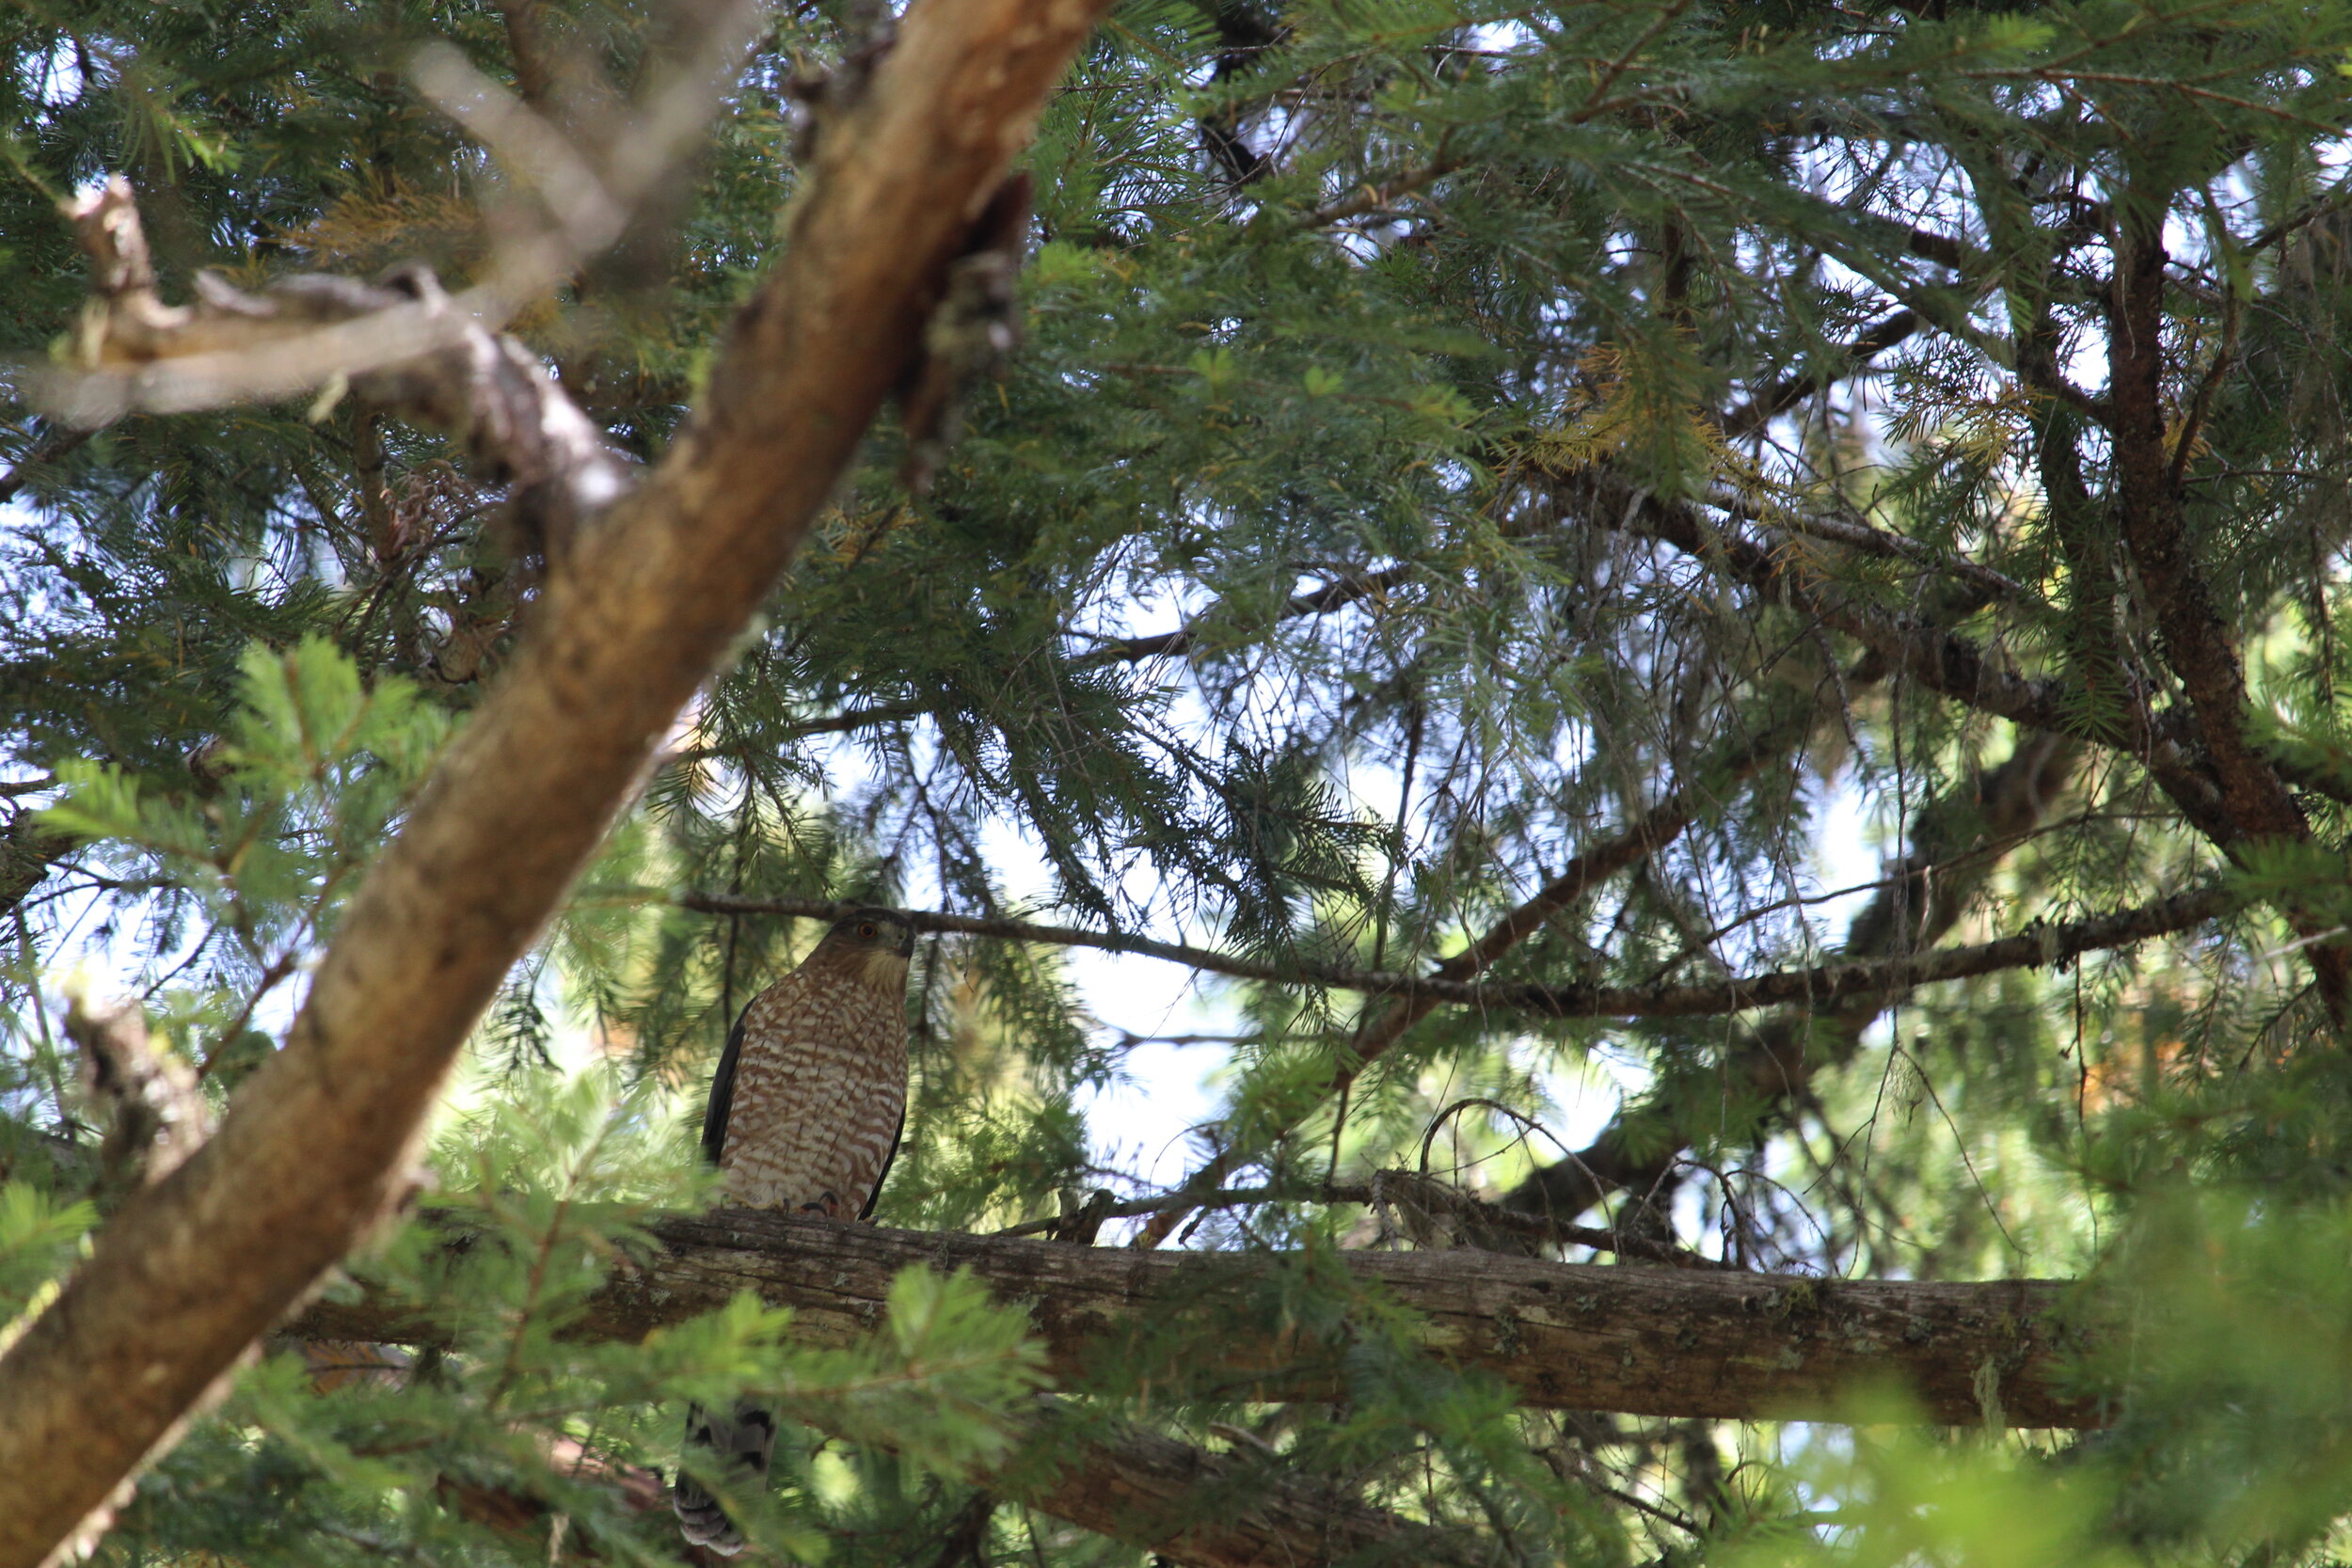  We never would have spotted this Cooper’s hawk without hearing the group of Stellar’s jays mobbing it! 